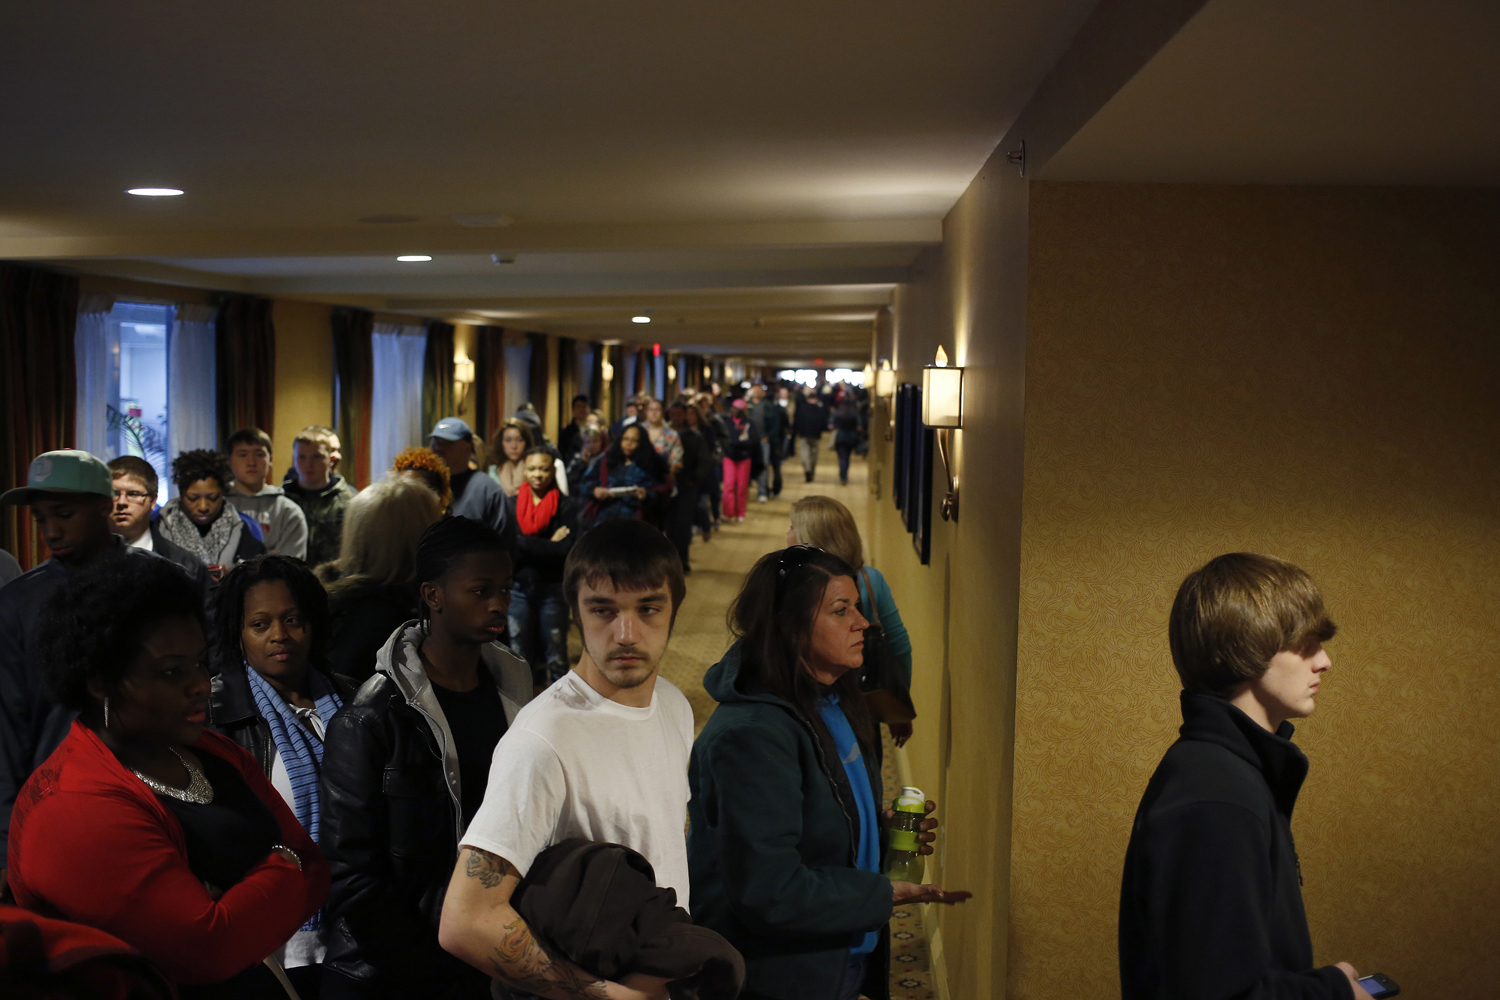 Prospective job applicants wait in line to learn about job openings at the Kentucky Kingdom Amusement Park during a job fair at the nearby Crowne Plaza Hotel in Louisville, Ky., Jan. 4, 2013. (Luke Sharett &mdash;Bloomberg/Getty Images)